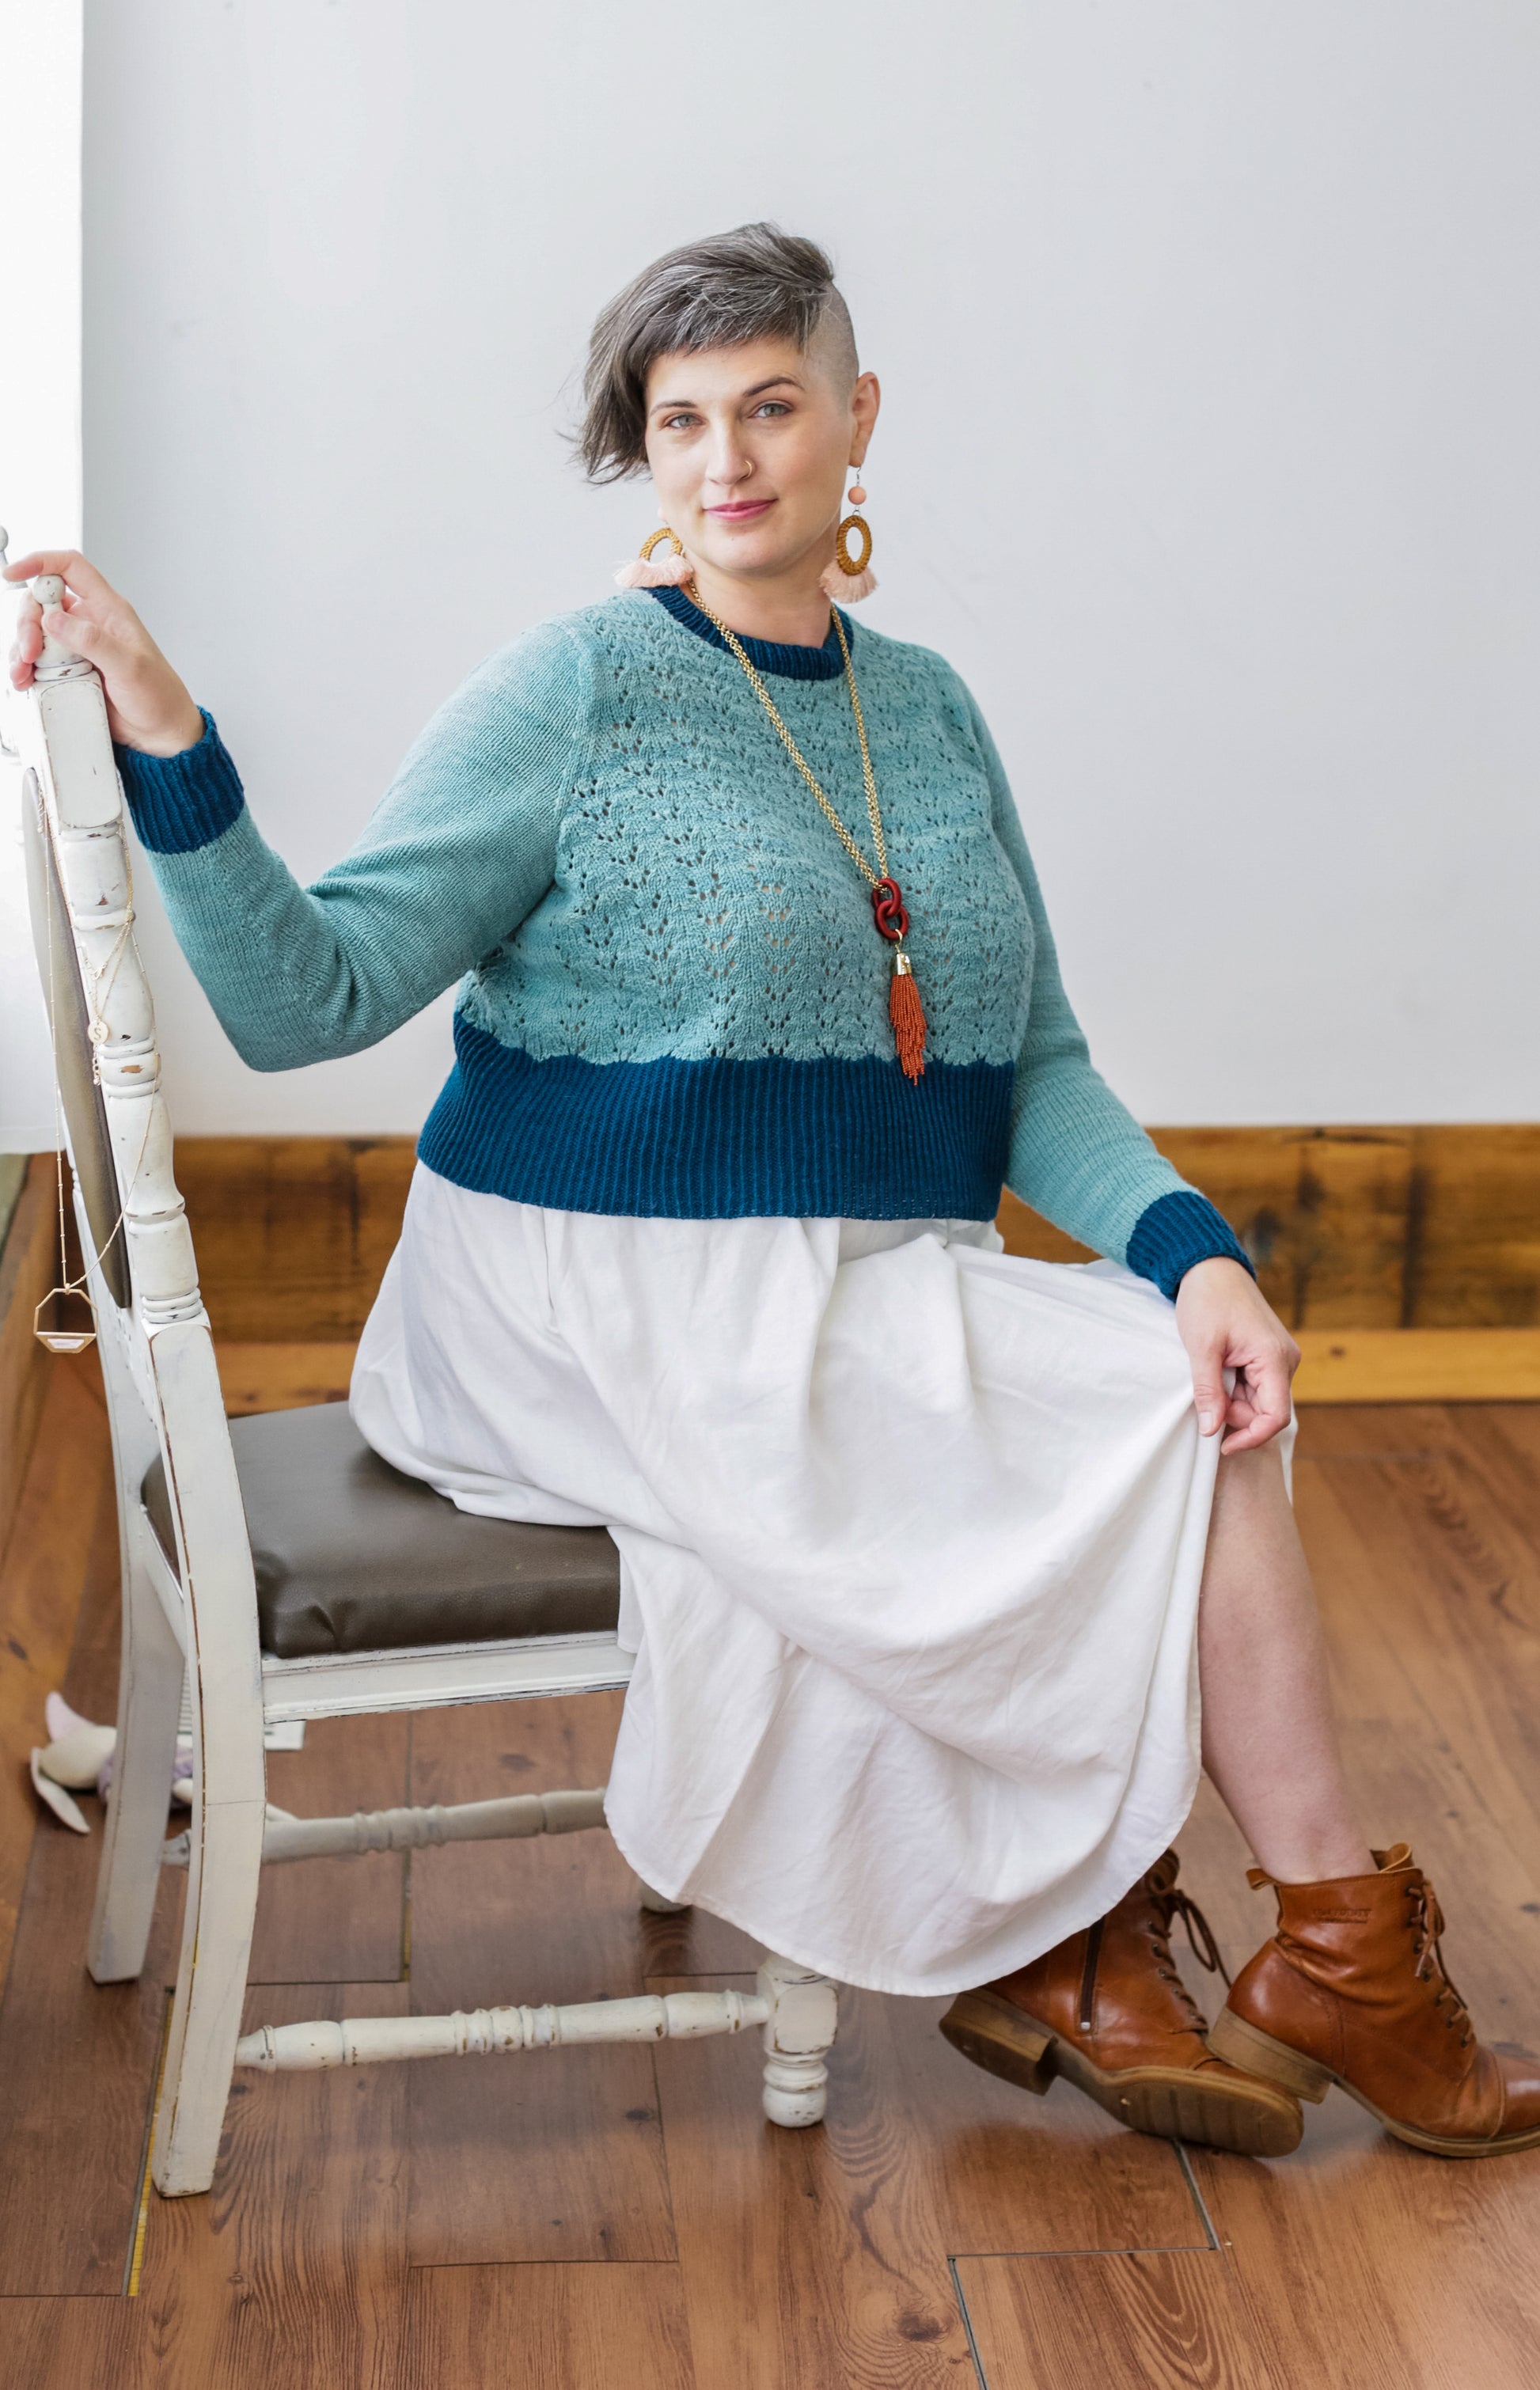 Seen from the side, Jen sits on a white antique chair. She wears a white skirt and brown boots with a cropped, lace knit pullover. The pullover is made with light blue yarn and contrasting dark blue cuffs, hem, and neckline.